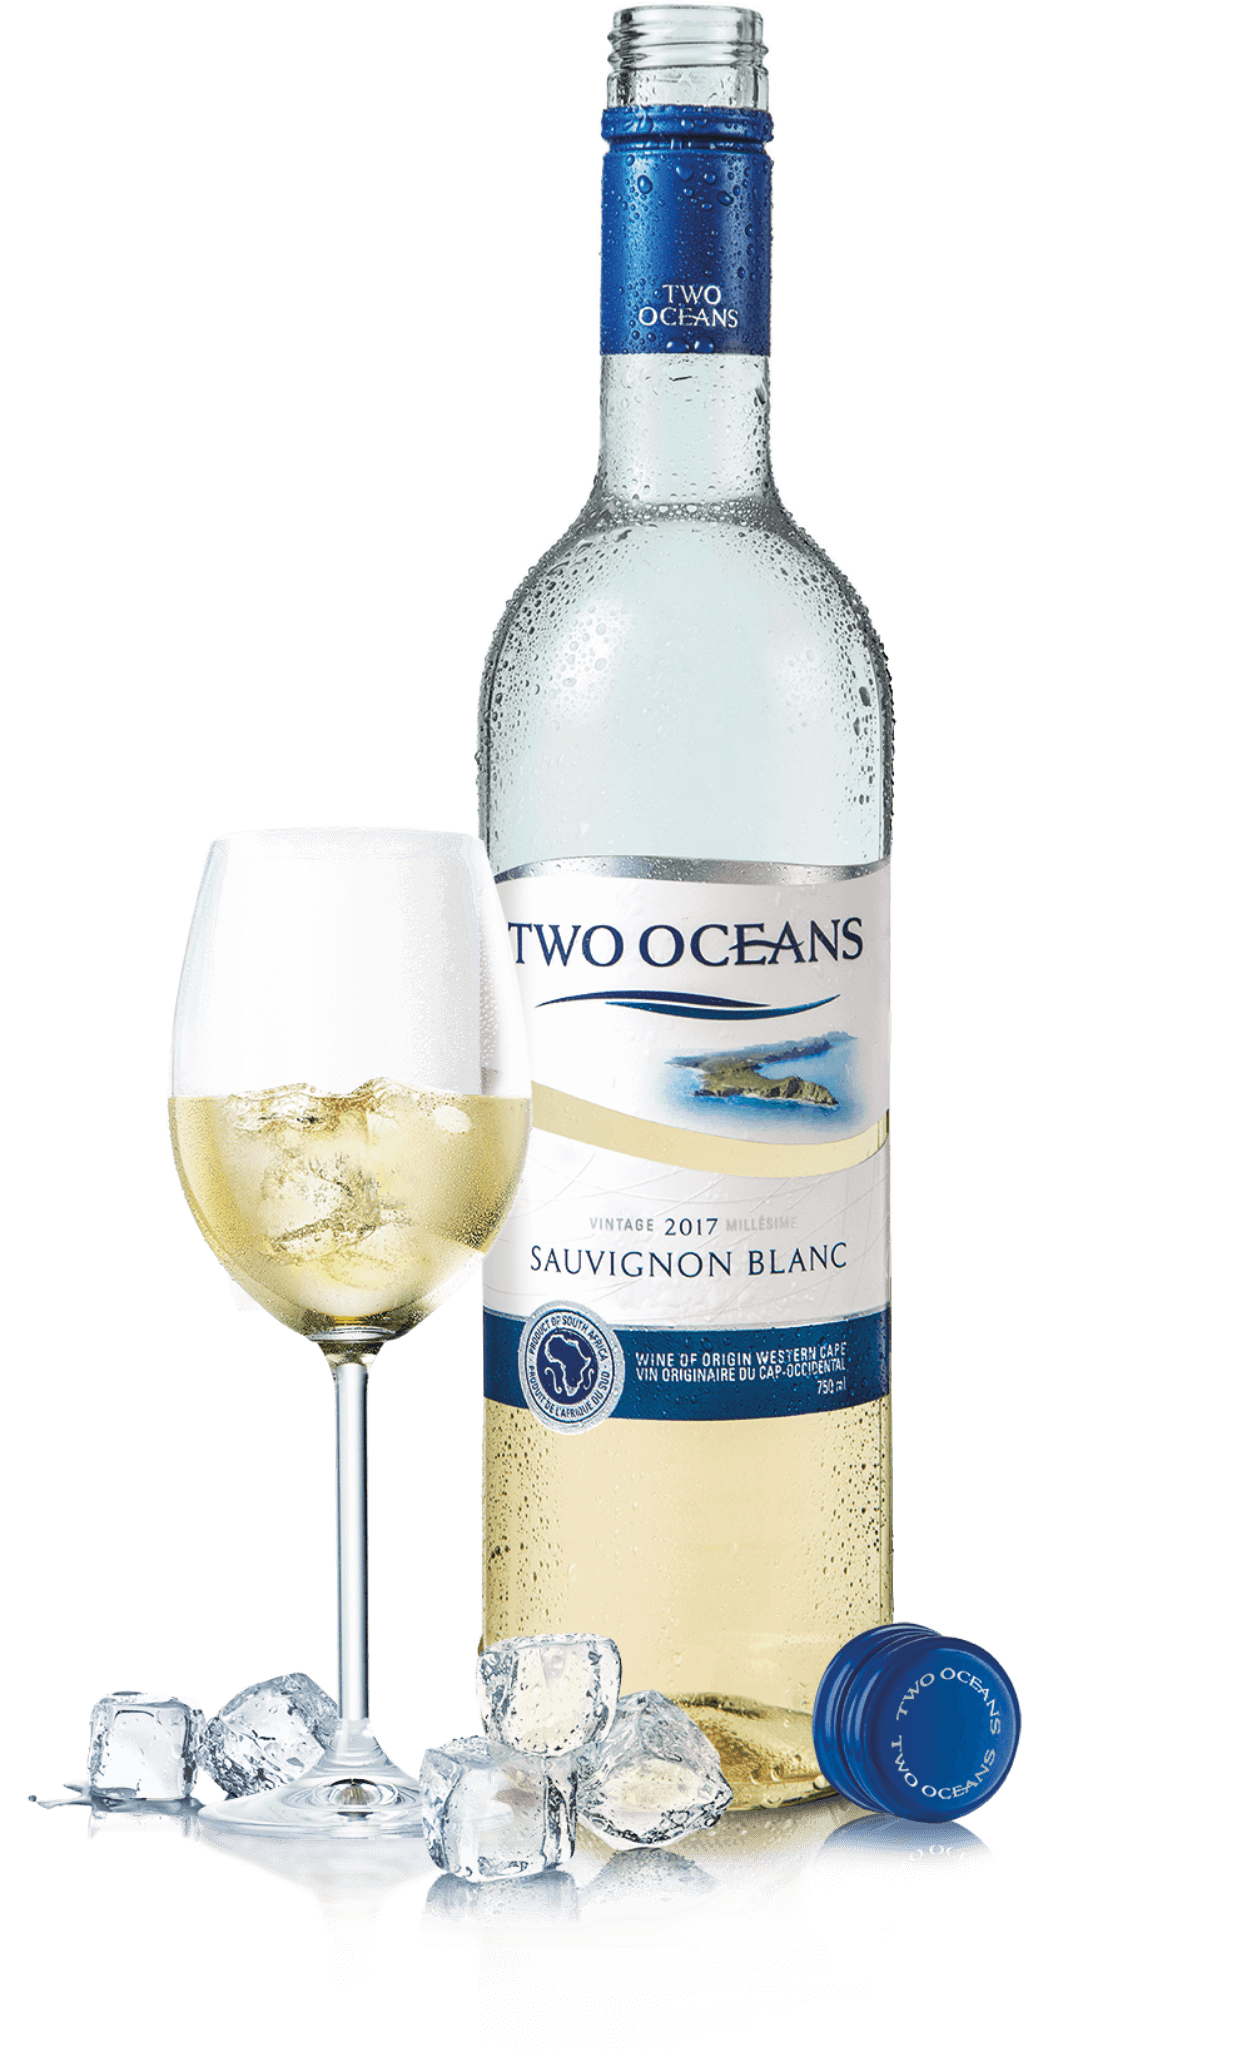 Two Oceans Sauvignon Blanc wine bottle glass and ice.